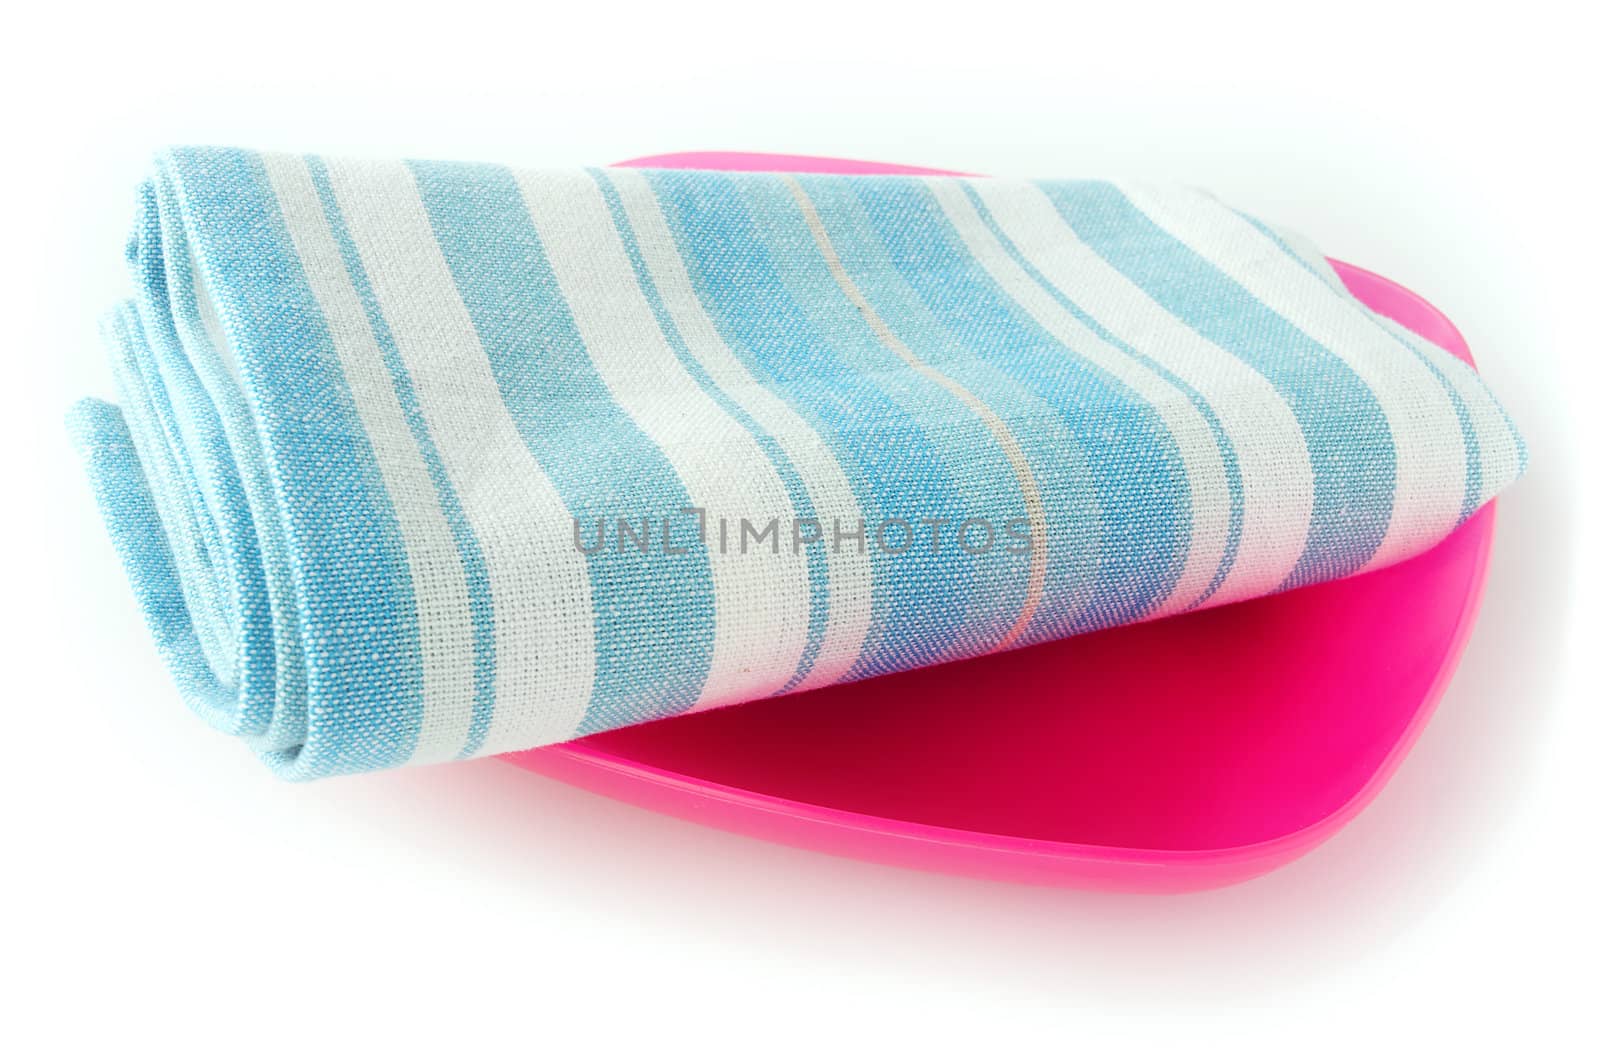 Striped and gridded towel on the plastic plate